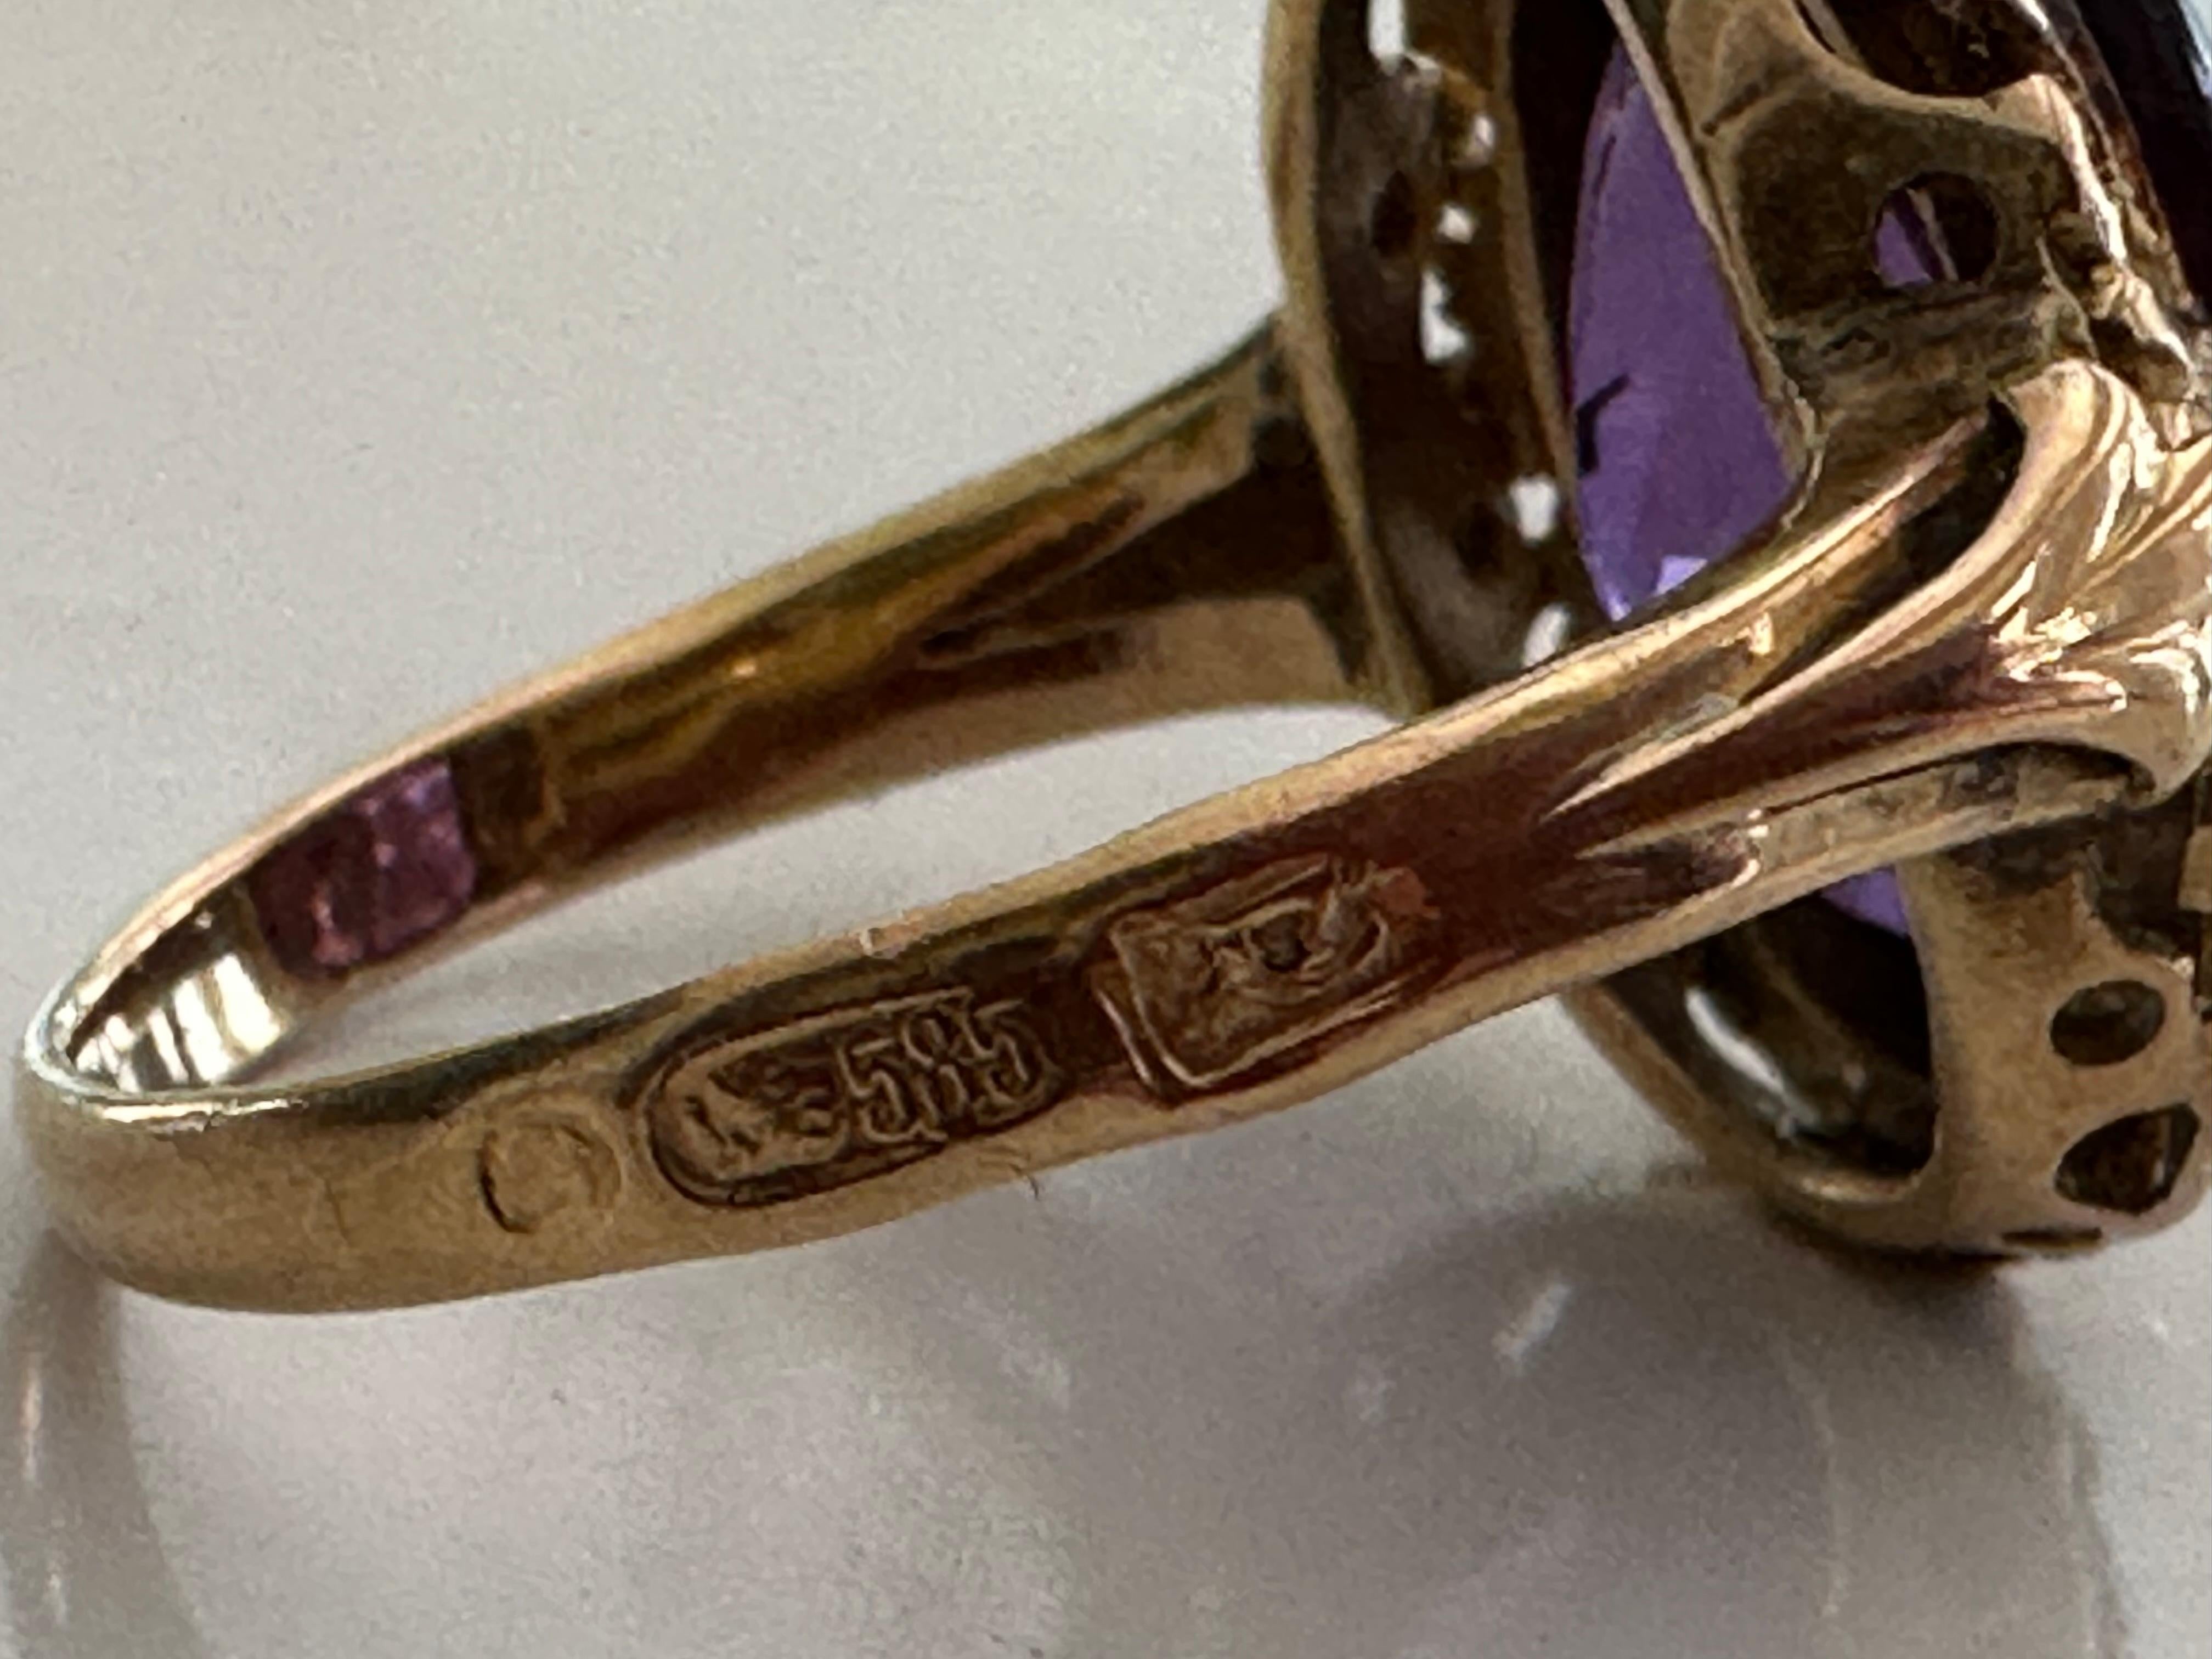 An oval shaped synthetic purple sapphire measuring 10 x 15mm radiates from within a hand carved band fashioned from 14kt yellow gold. The European marks on the outside of the band indicate the ring was most likely manufactured in England. 


